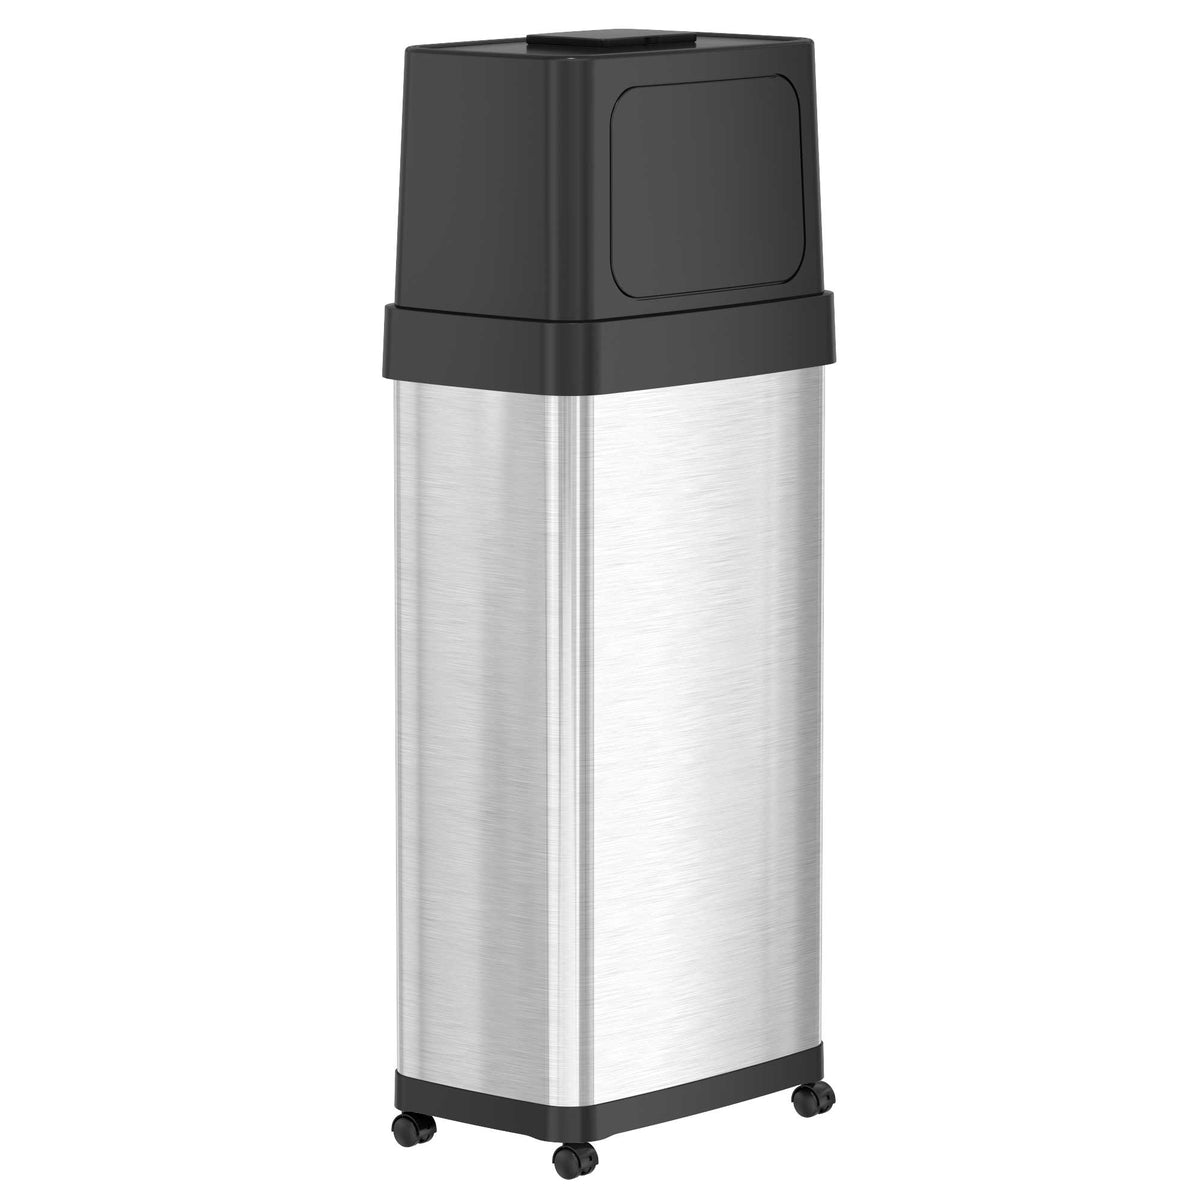 24 Gallon / 91 Liter Dual Push Door Trash Can with Wheels